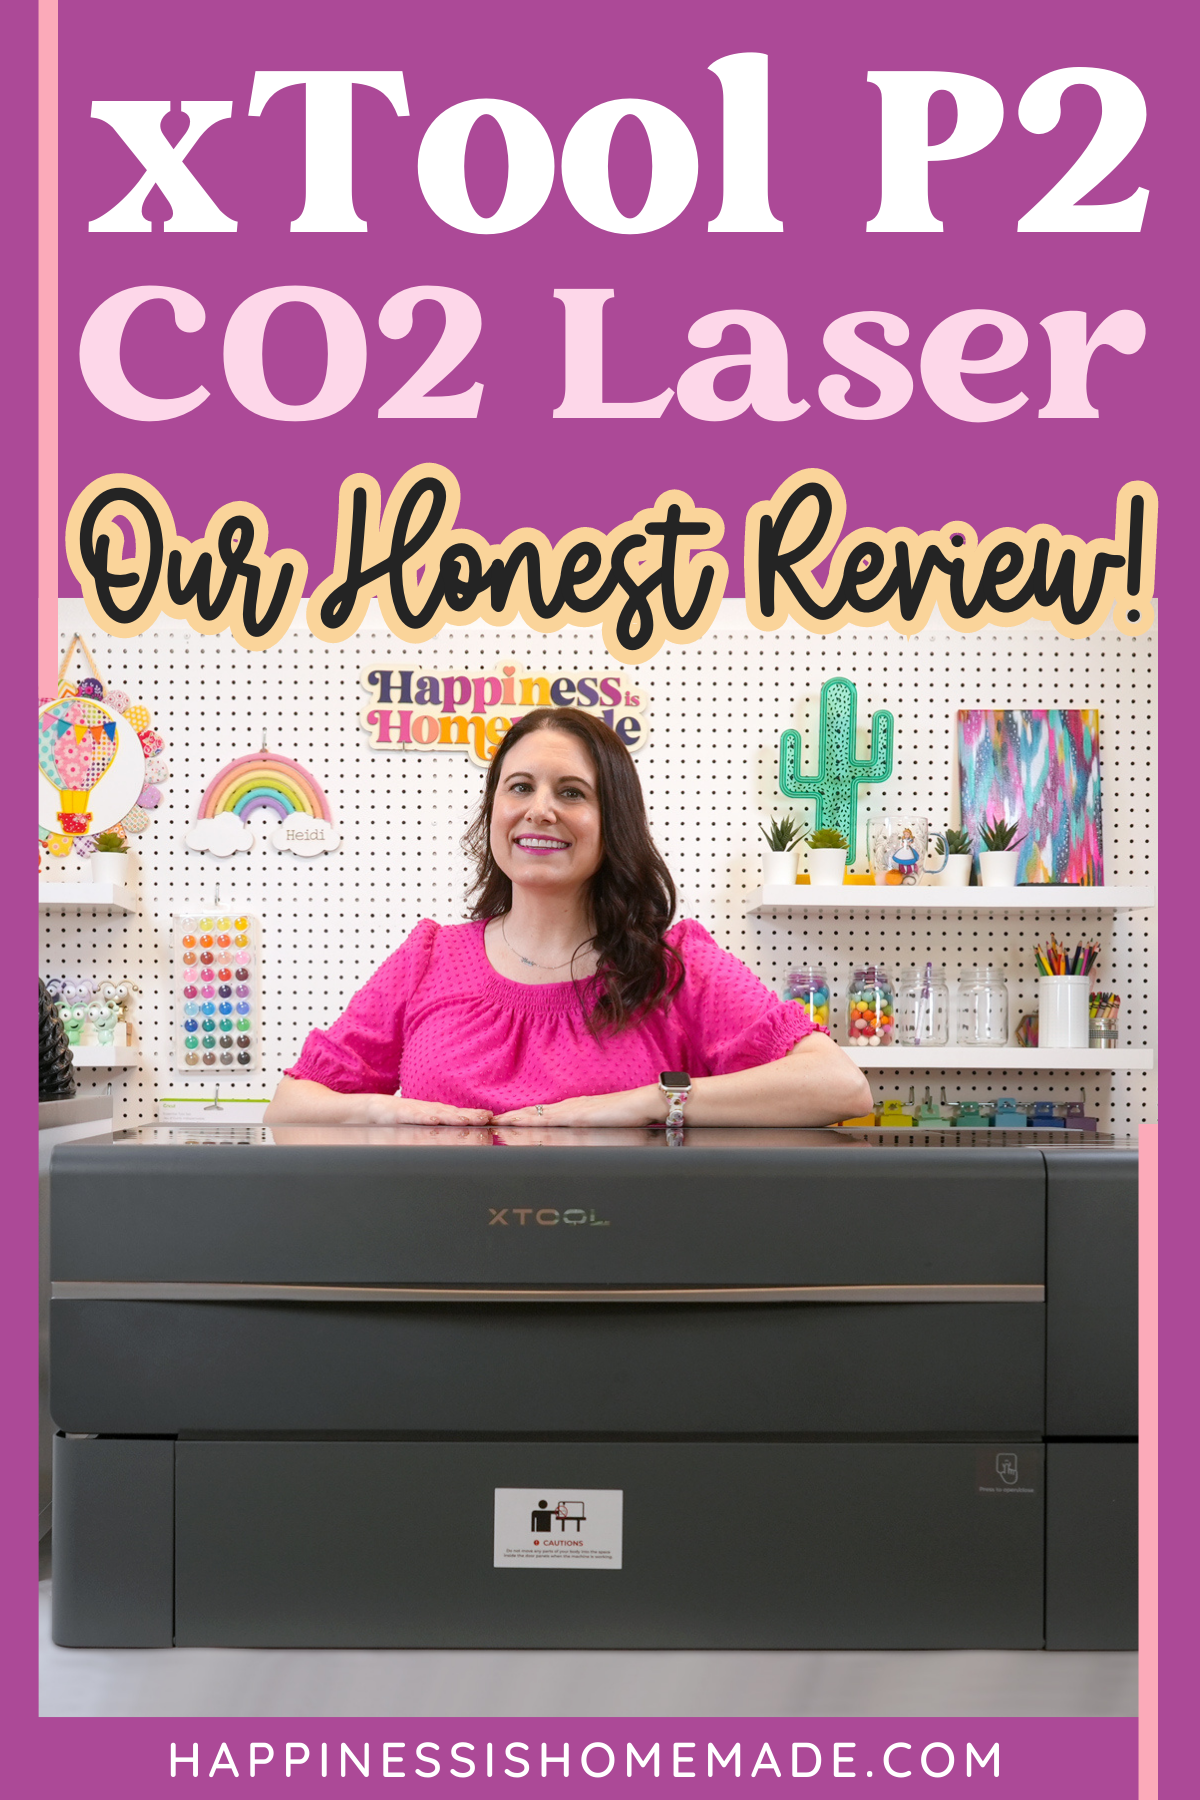 xTool P2 CO2 Laser Cutter Review: Everything You Need to Know!